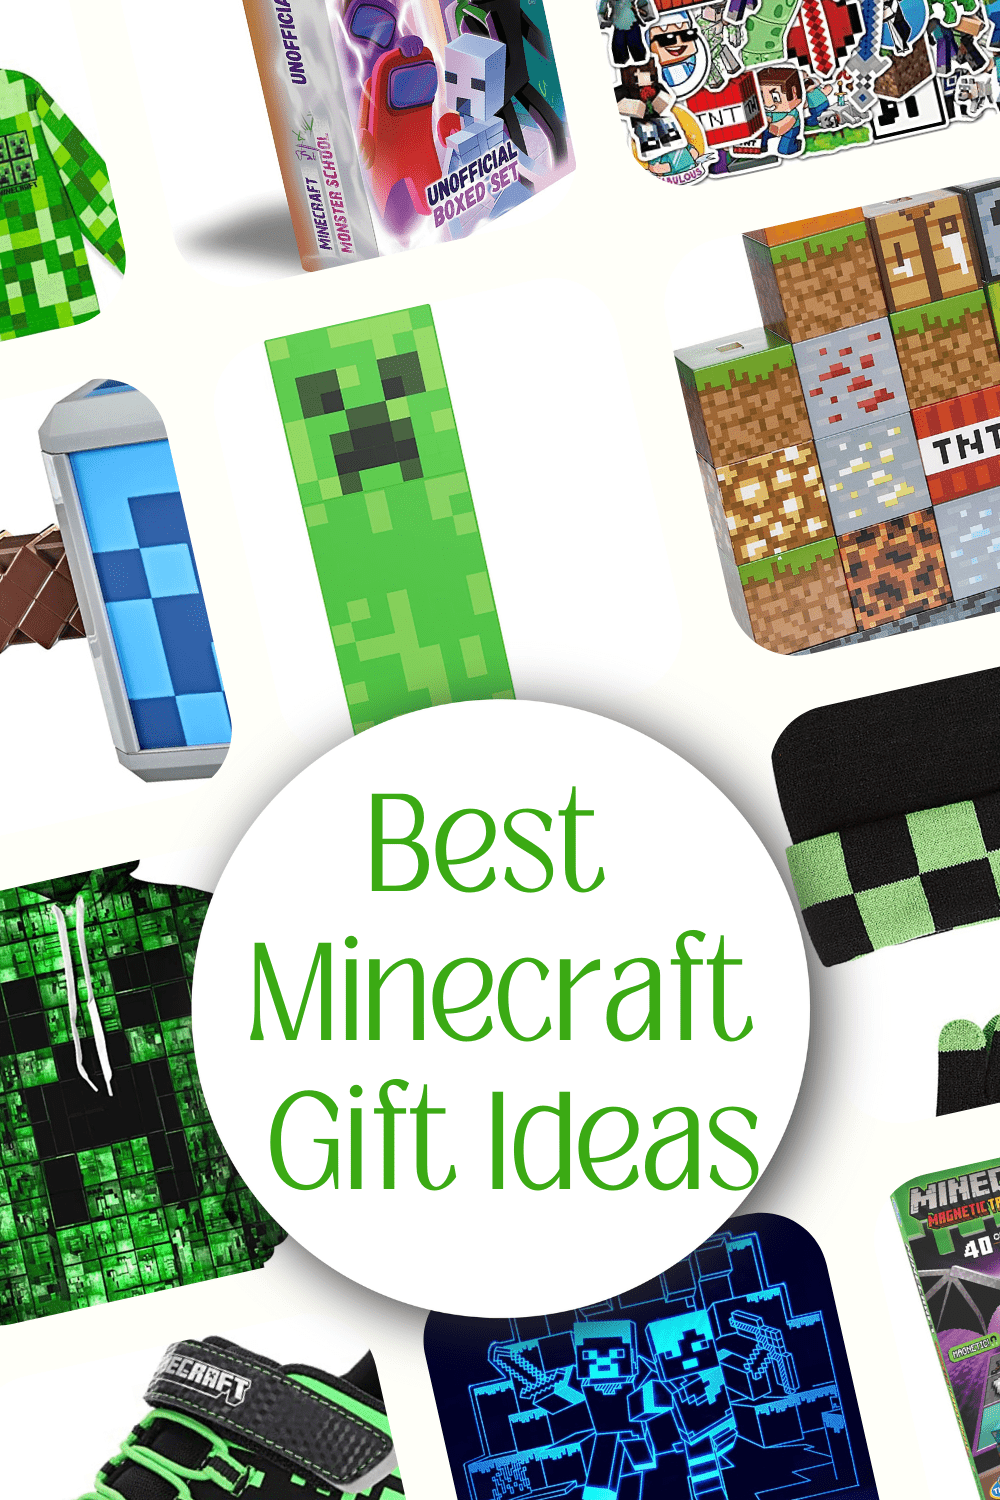 Collage of Minecraft gift items